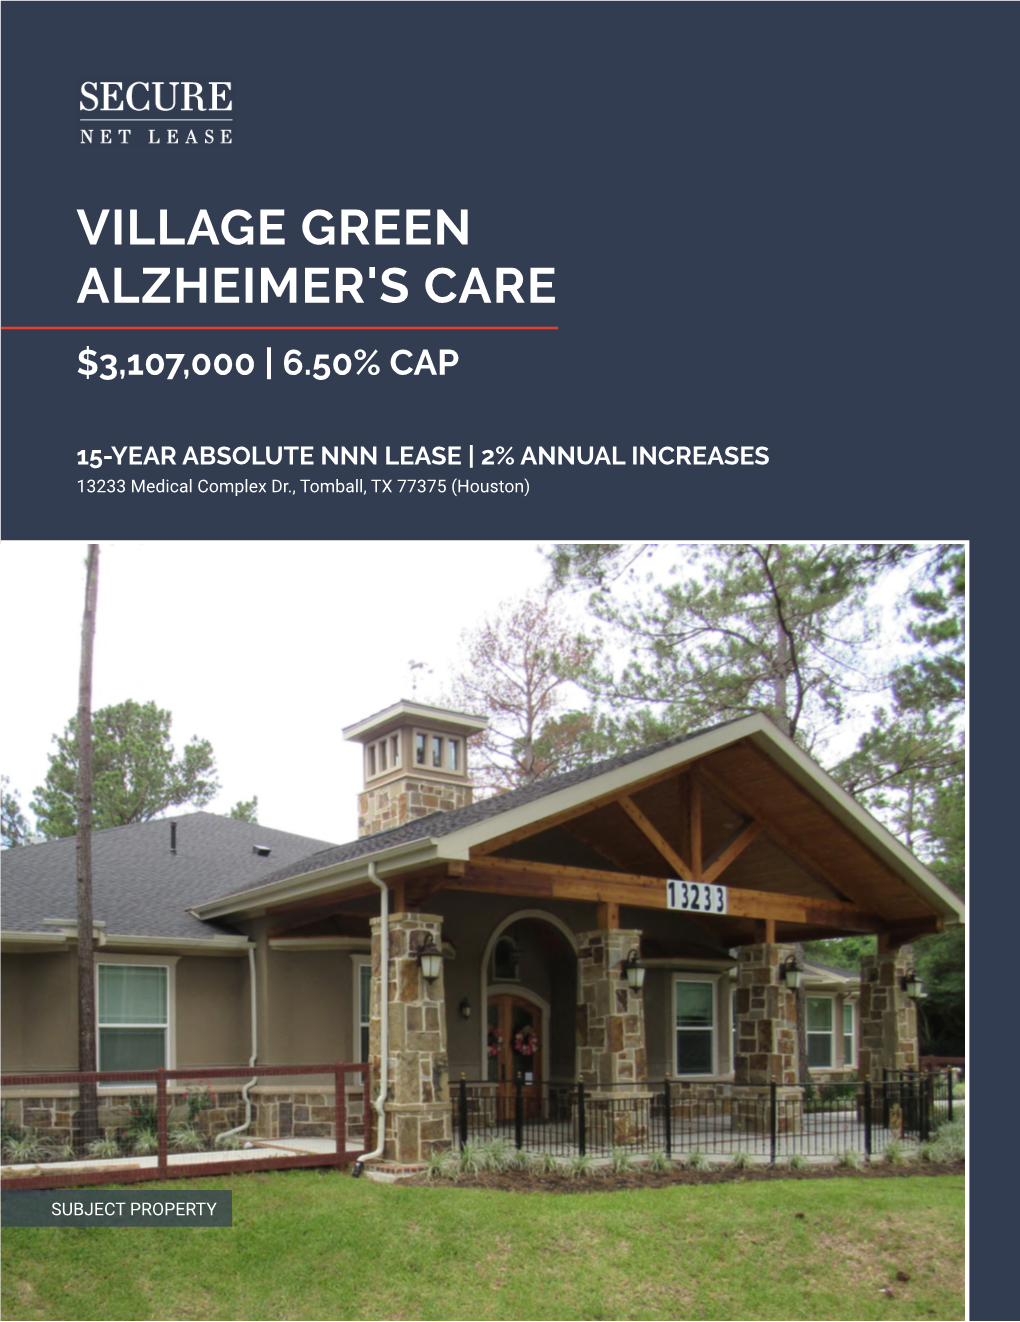 Village Green Alzheimer's Care Home, LLC Personally Guaranteed the Lease